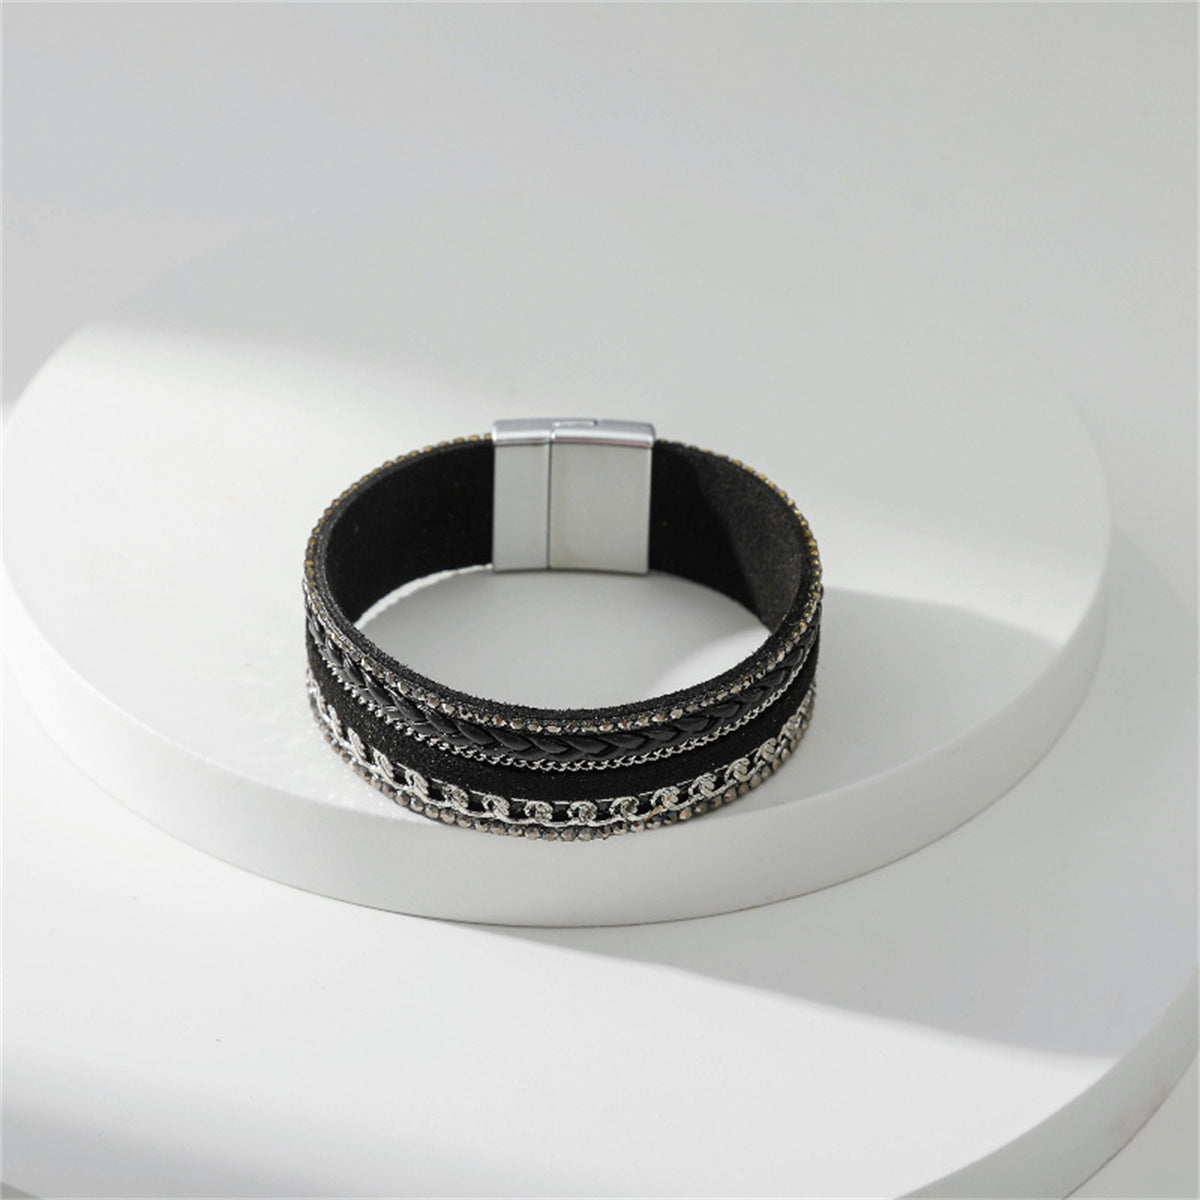 Black Polystyrene & Cubic Zirconia Silver-Plated Curb-Chain Bracelet